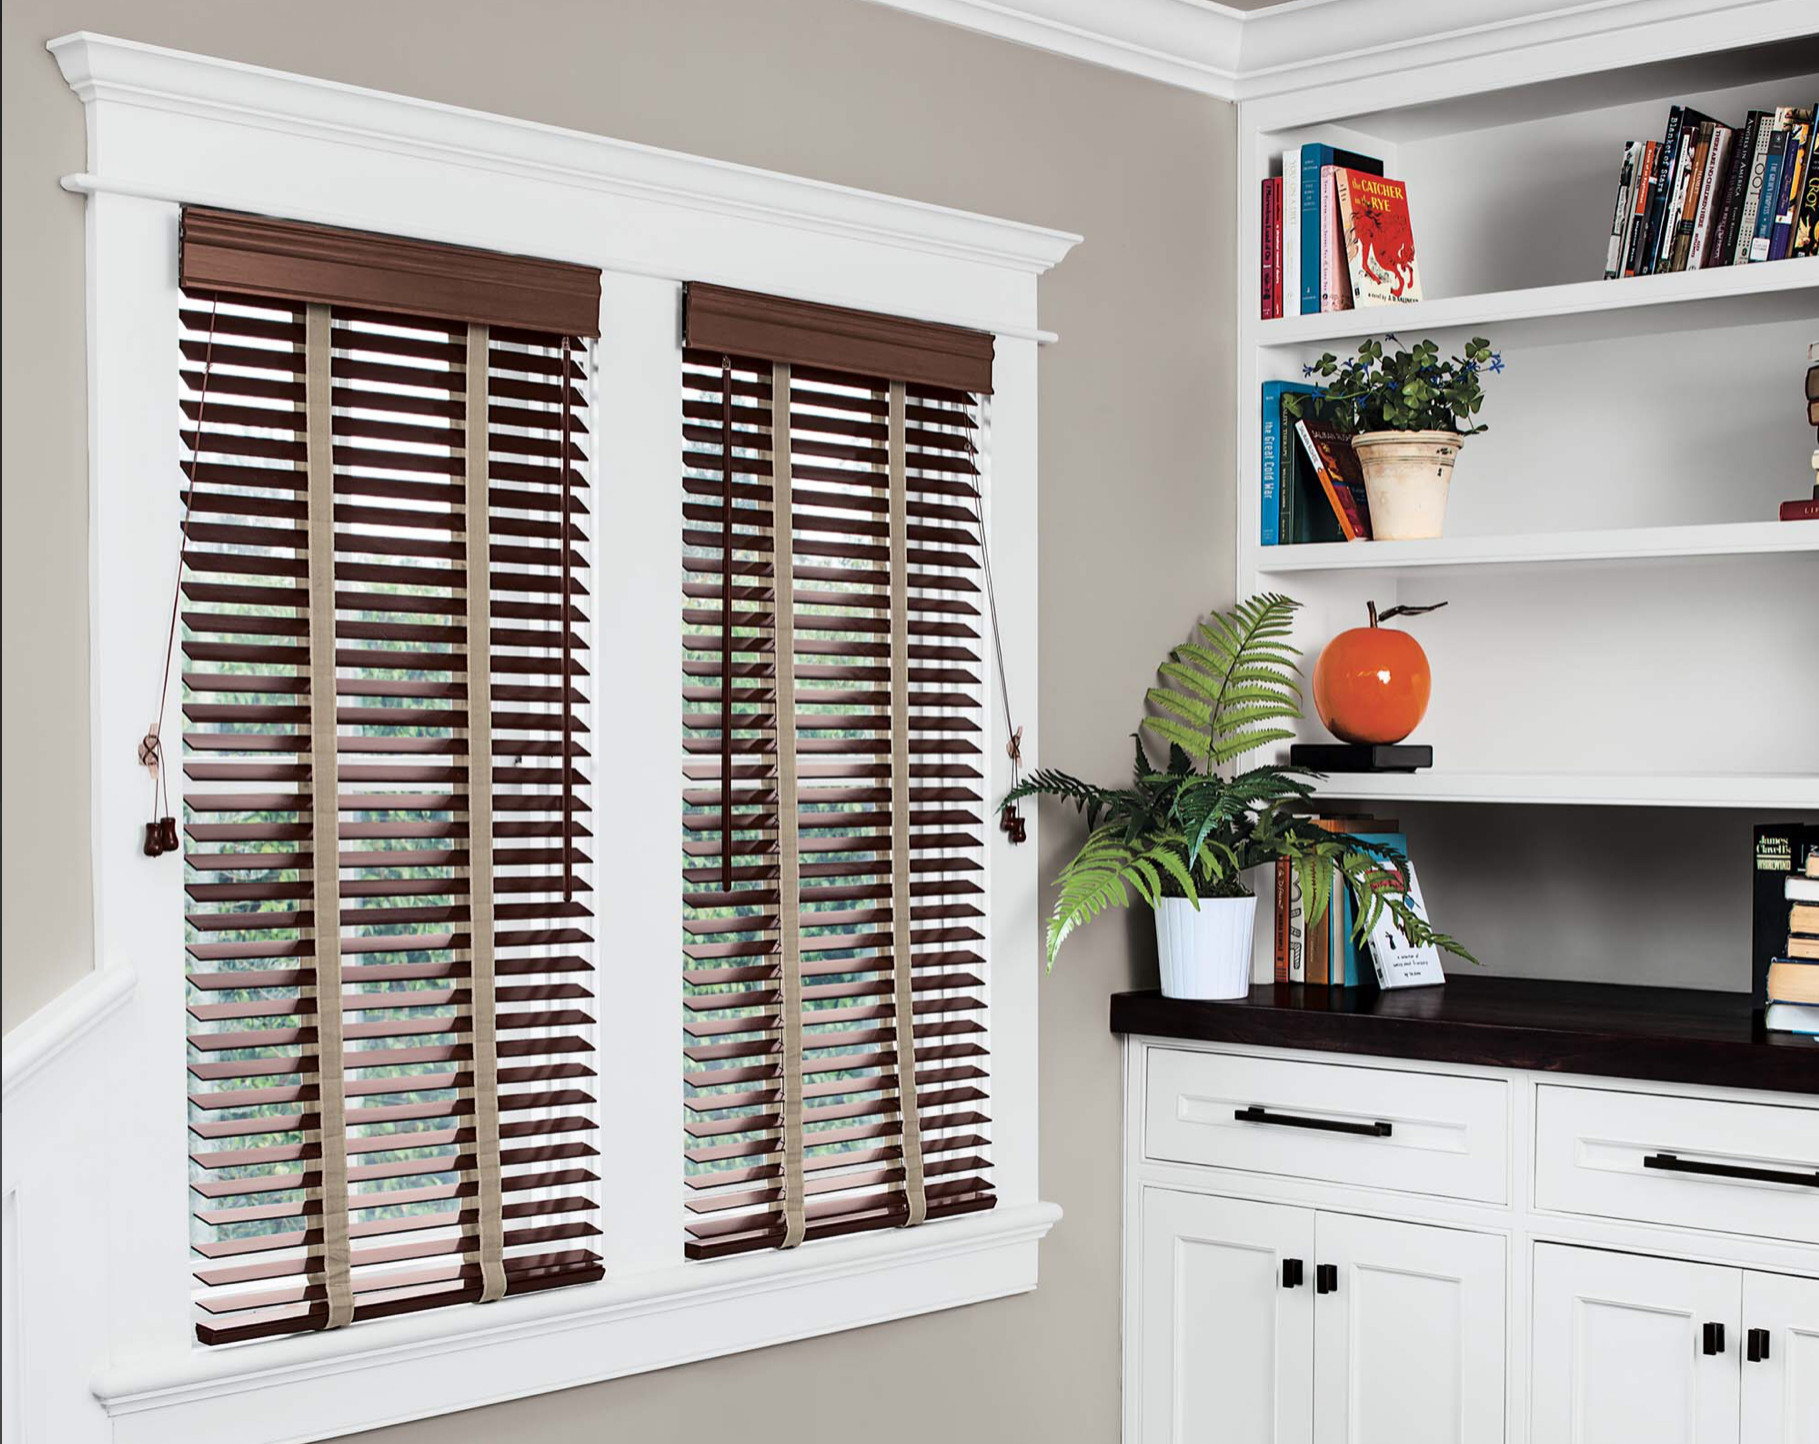 Wood Blinds With Ladder Tape - Photos & Ideas | Houzz